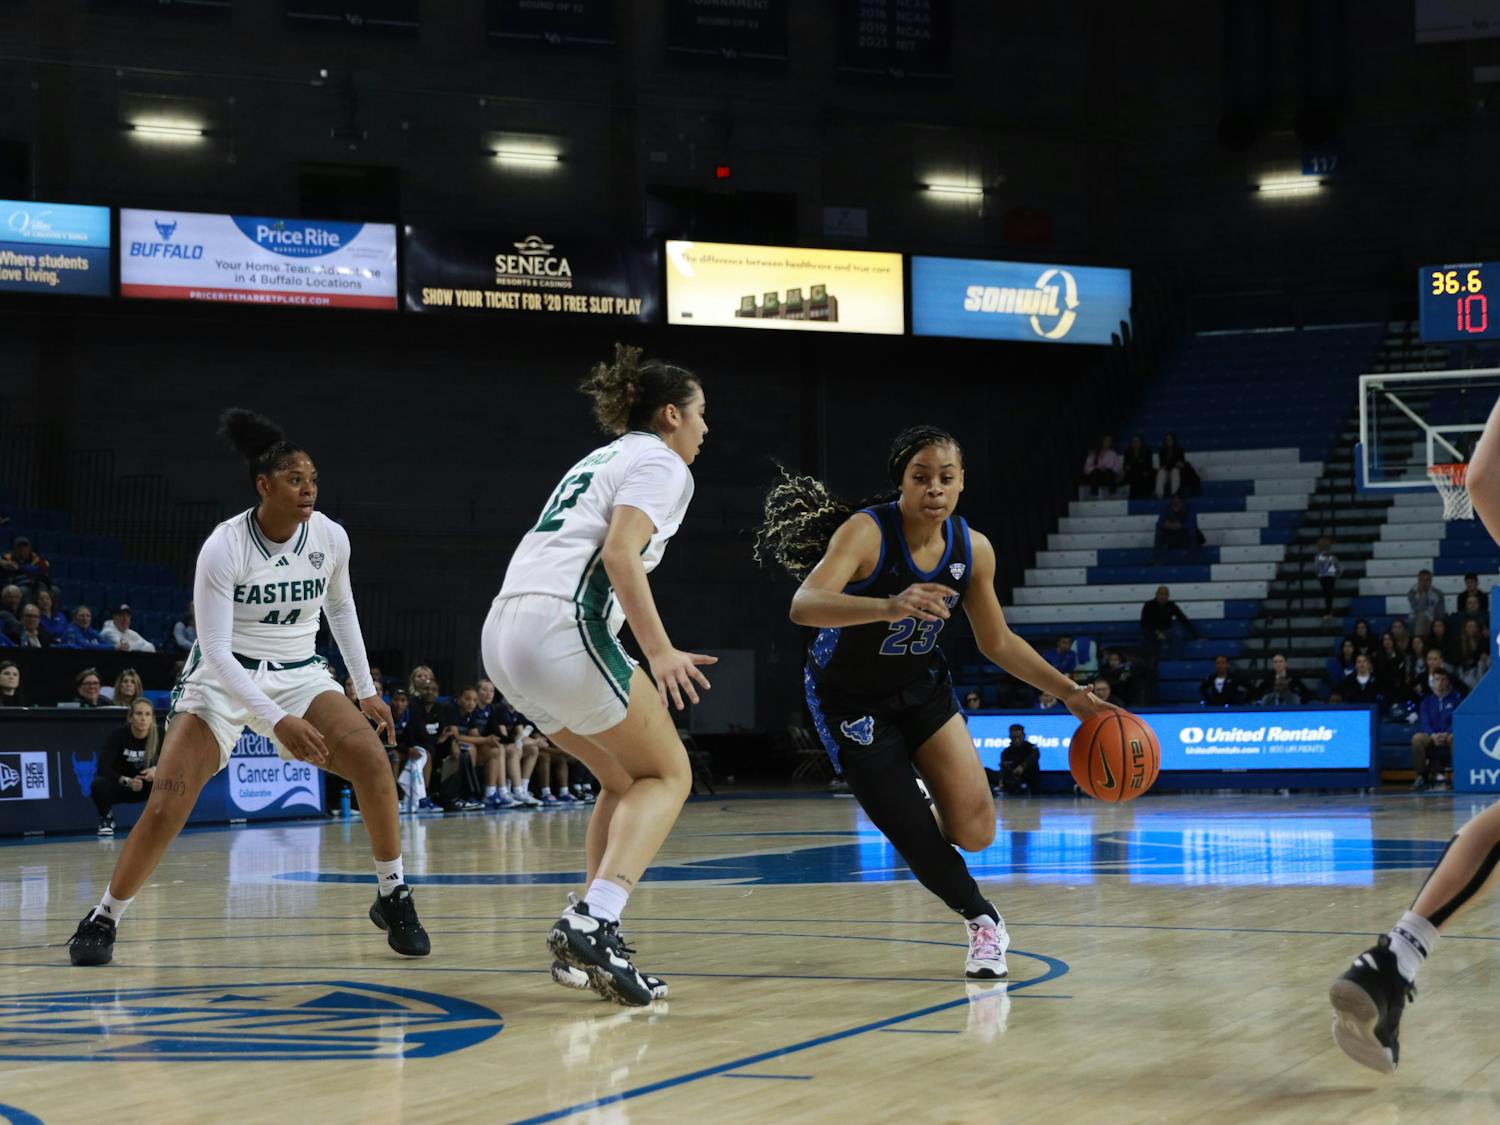 Freshman forward Alexis Davis, pictured above, led the Bulls to a 14-point lead by the end of the first quarter.&nbsp;